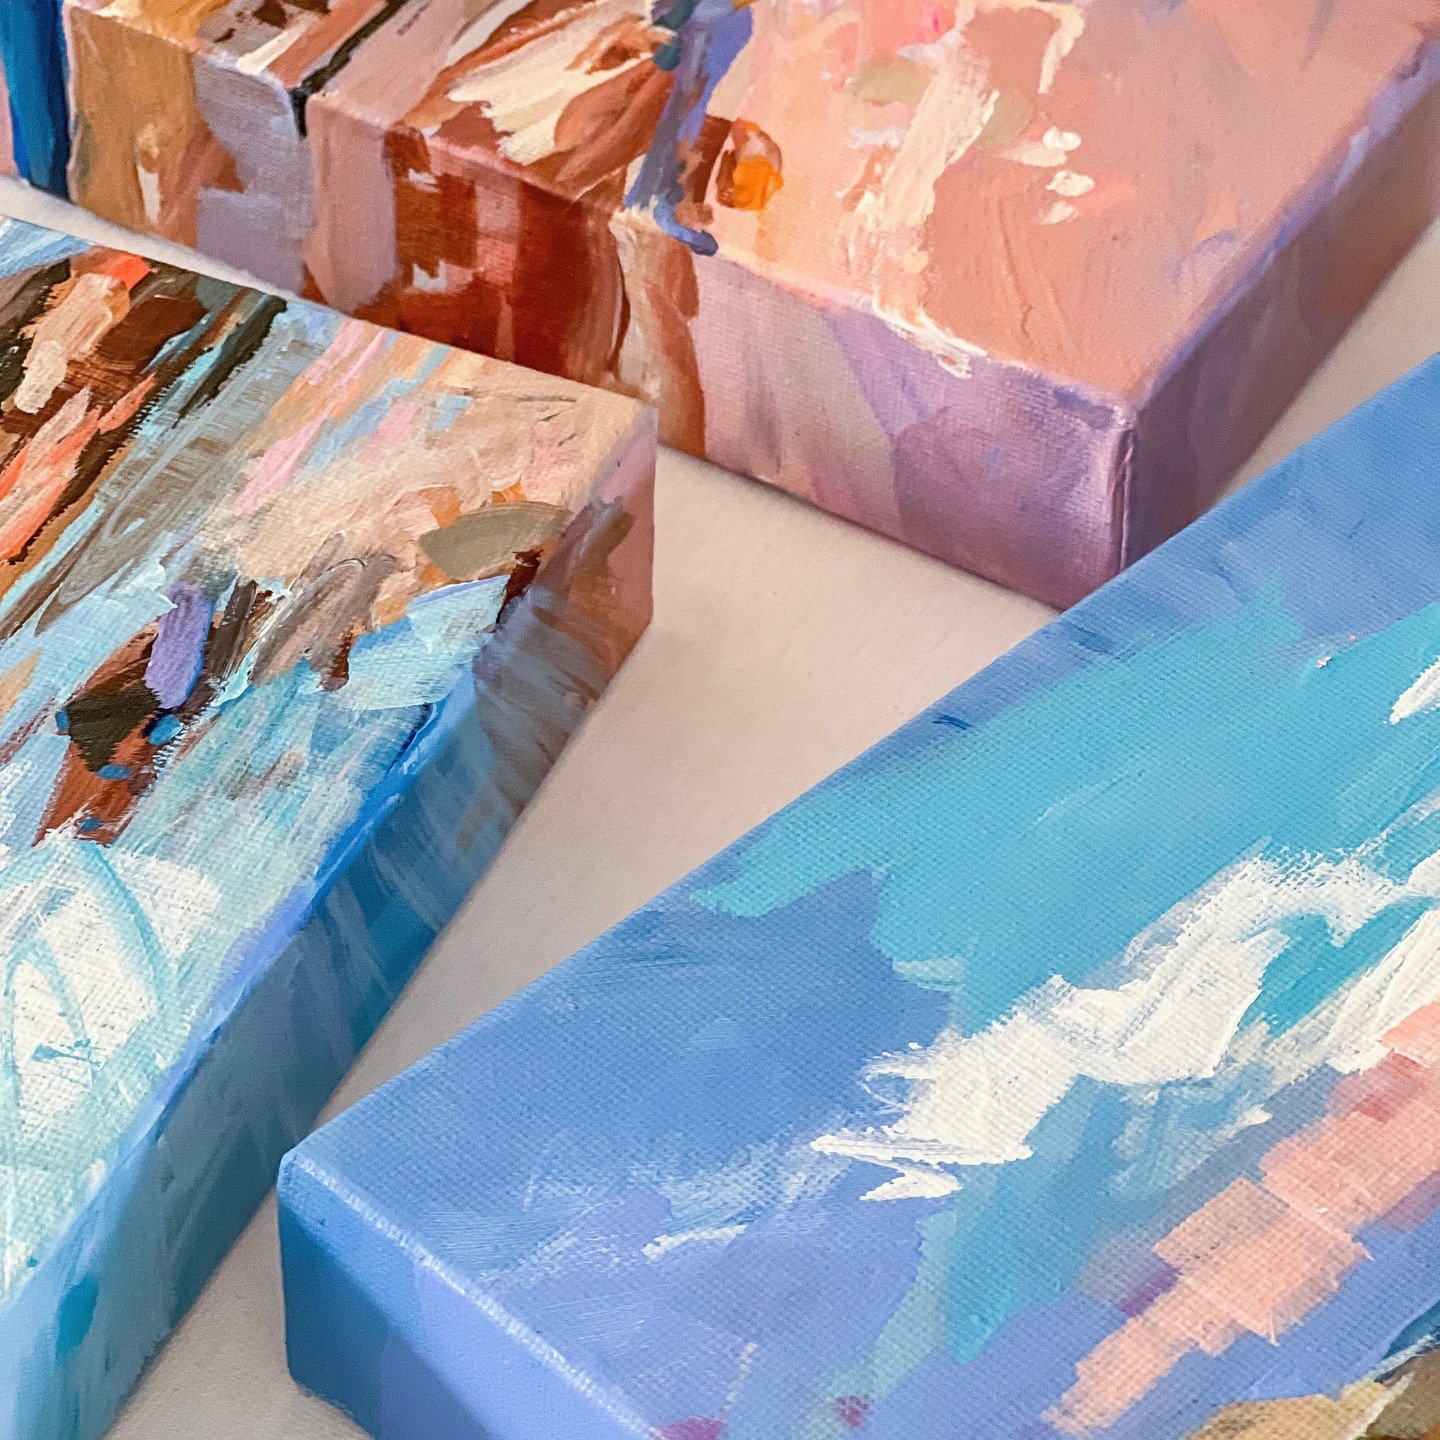 Caught in a sea breeze right on your shelf! 🌊☀️ 

These mini seascapes are all about love, big skies and chill vibes.

EXCLUSIVE ALERT: They're dropping to my VIPs this Friday at 8 PM! They&rsquo;re cool, they&rsquo;re mini, and they can&rsquo;t wai